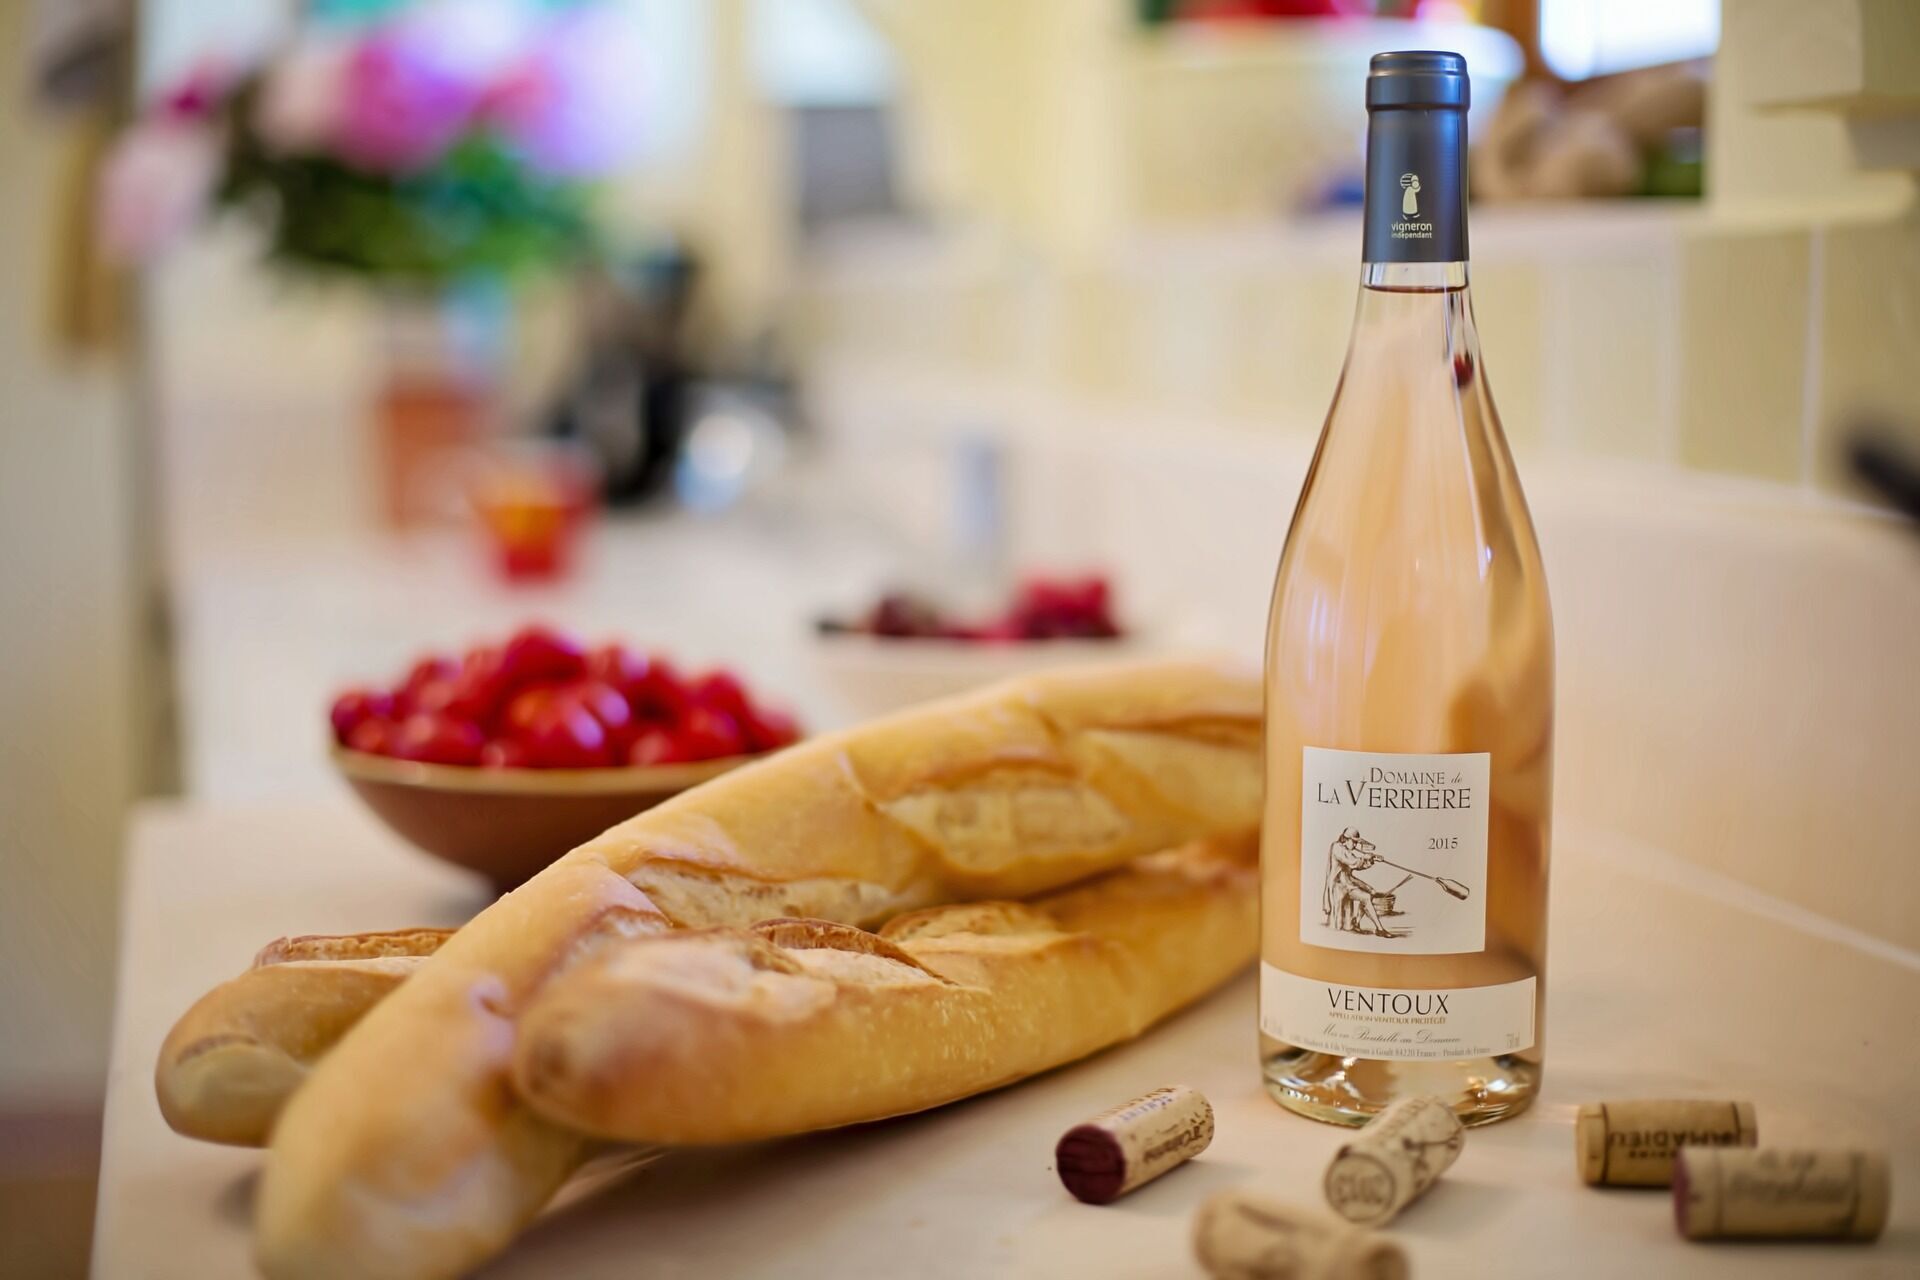 Fish and seafood go with rosé wines